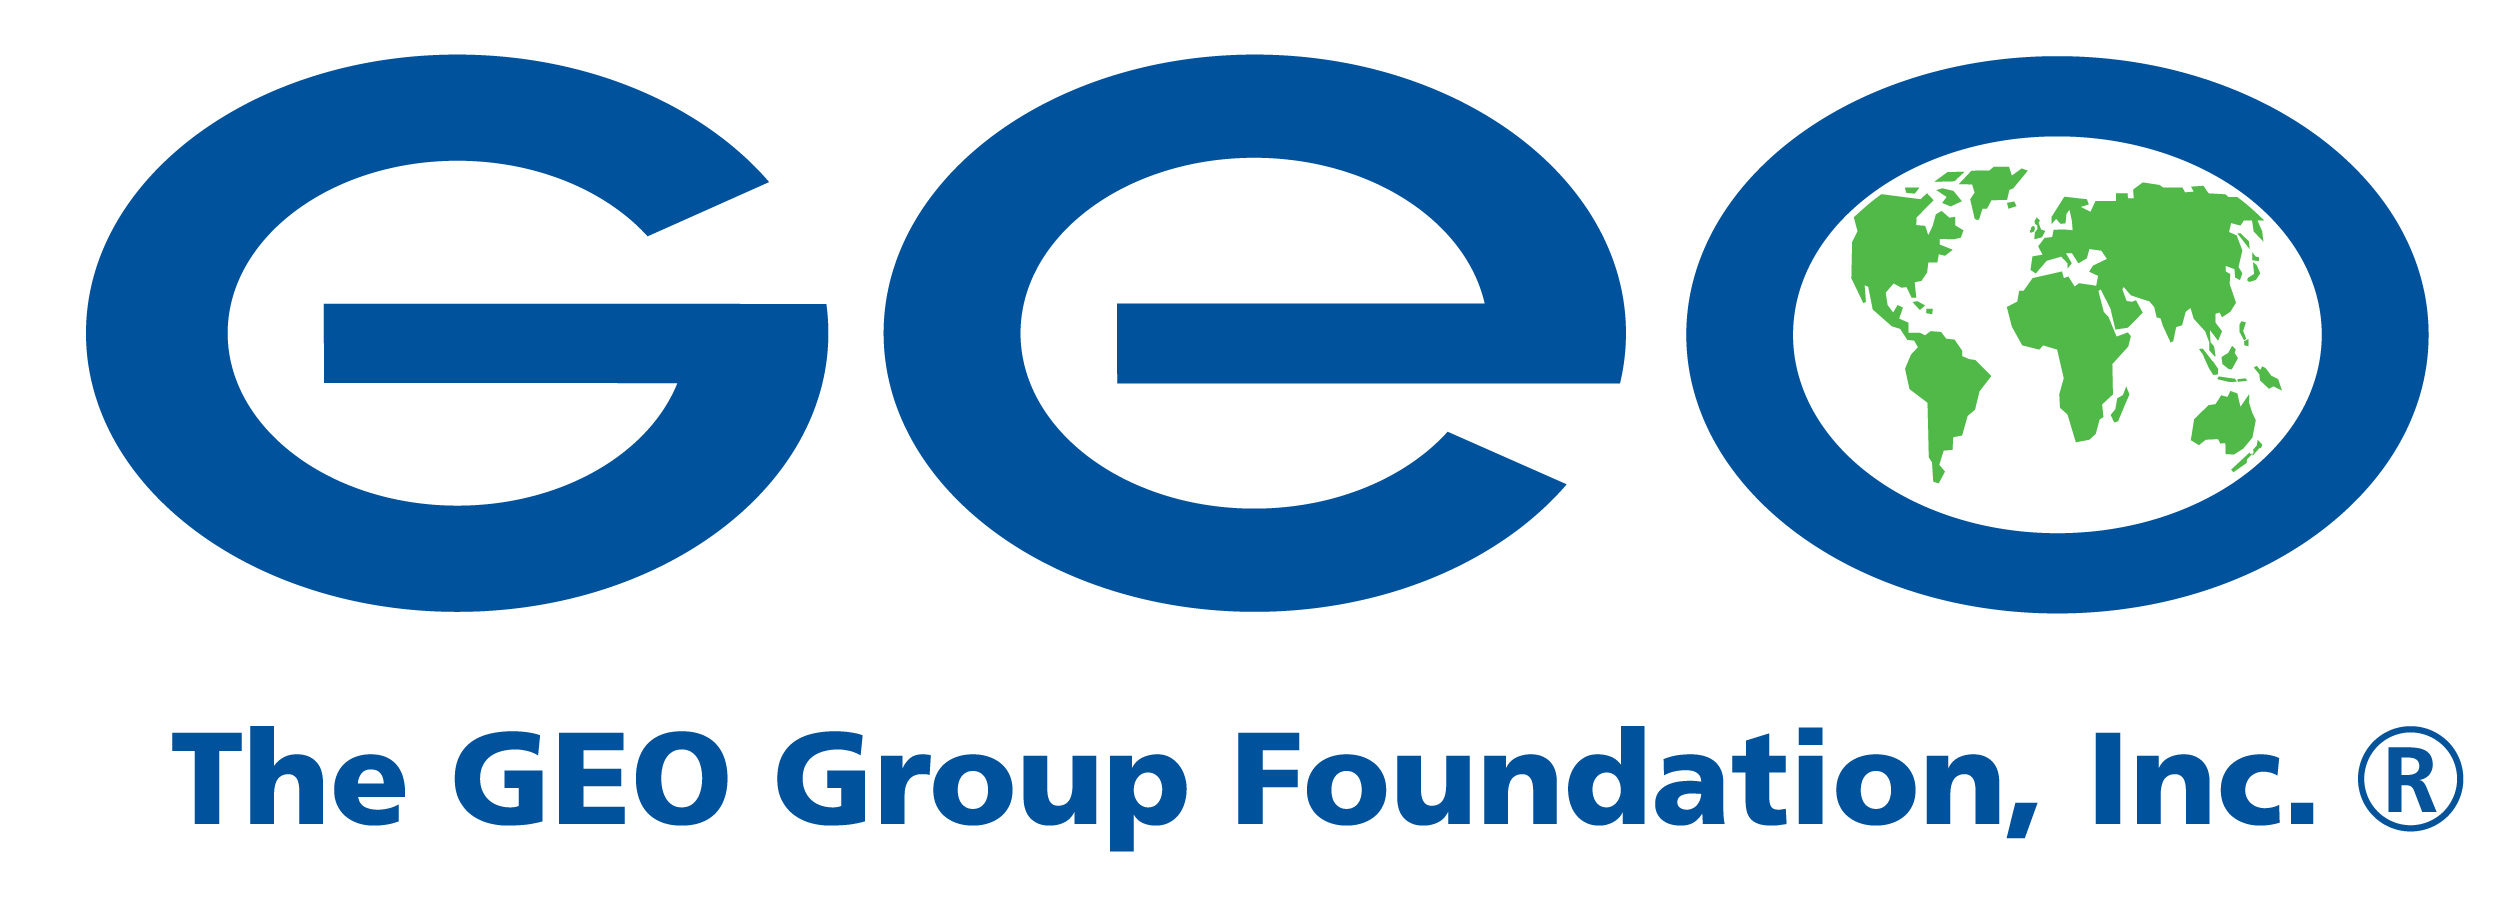 The GEO Group Foundation